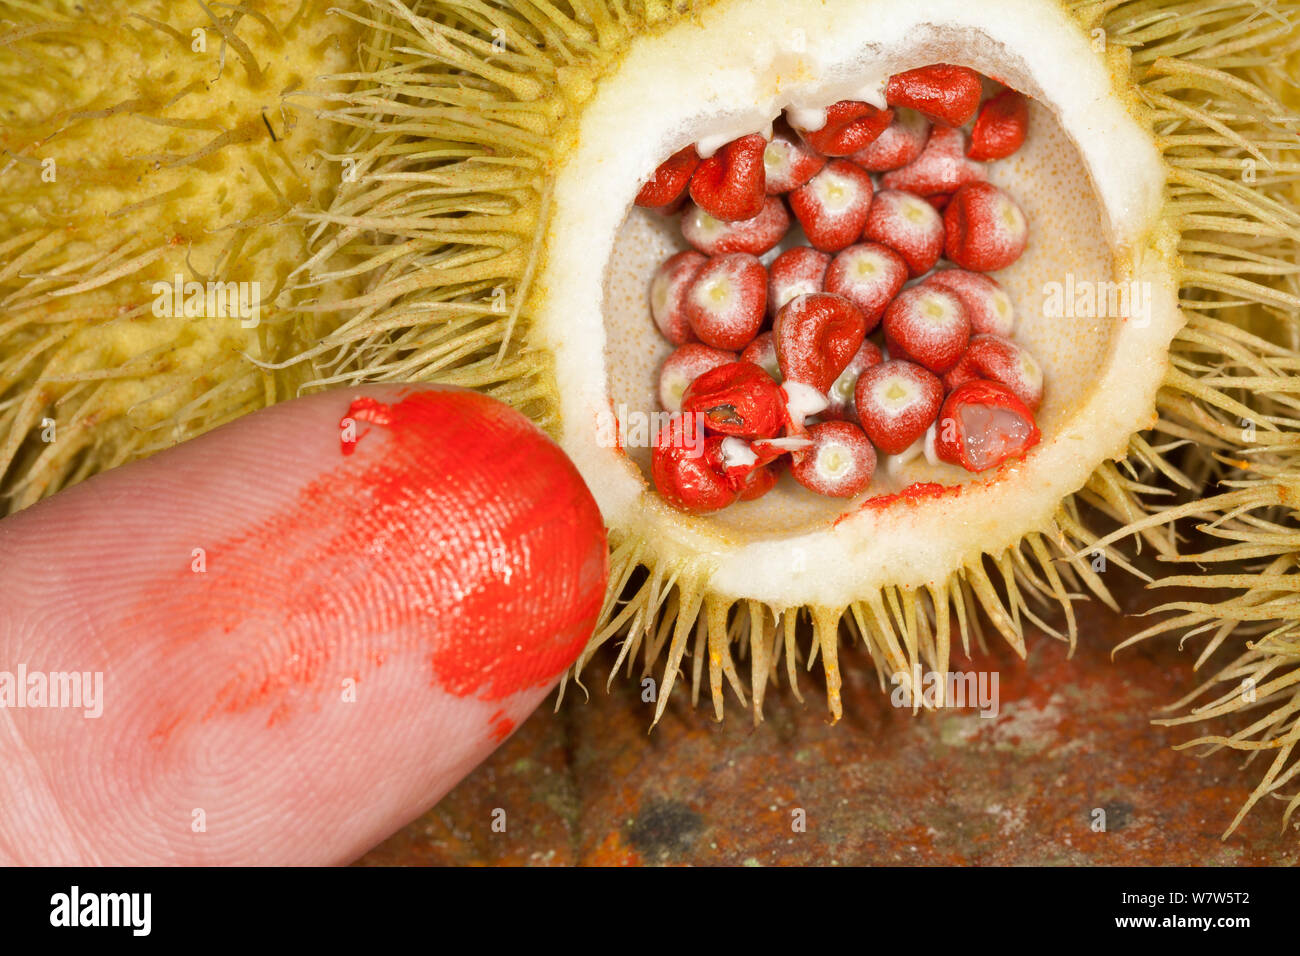 Achiote seeds (Bixa orellana) showing the annatto coloring they produce on finger, South America, November. Stock Photo